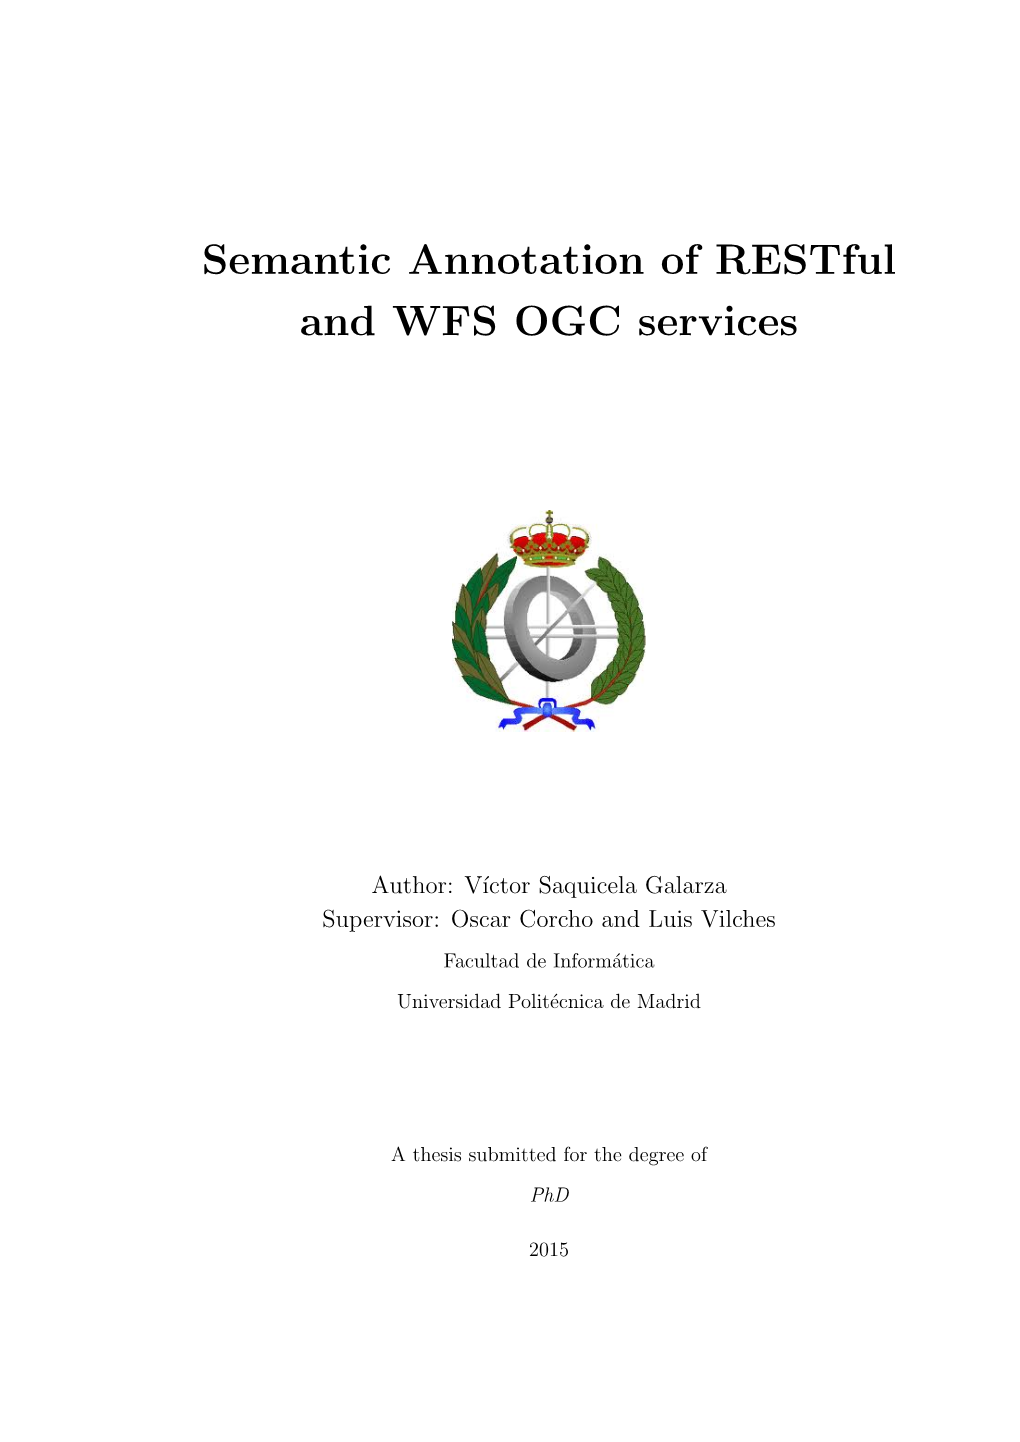 Semantic Annotation of Restful and WFS OGC Services